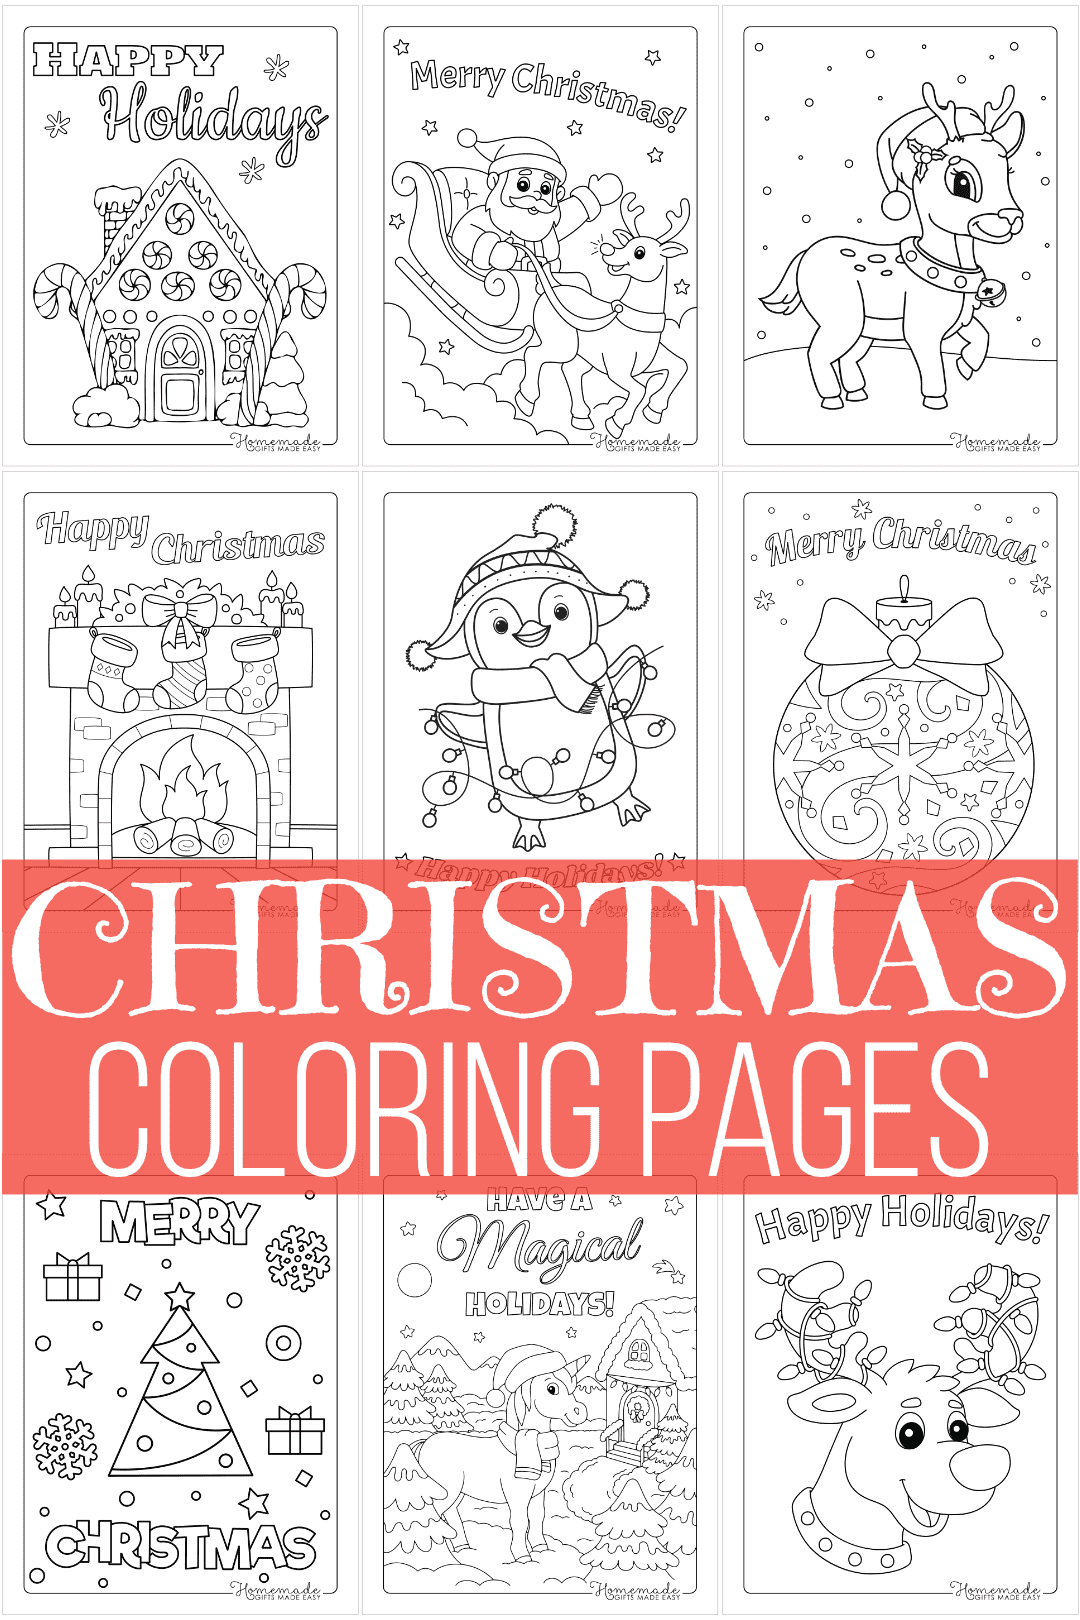 250+ Free Original 16+ Kid Christmas Coloring Pages Printable for Kids & Adults - Kids Activities Blog